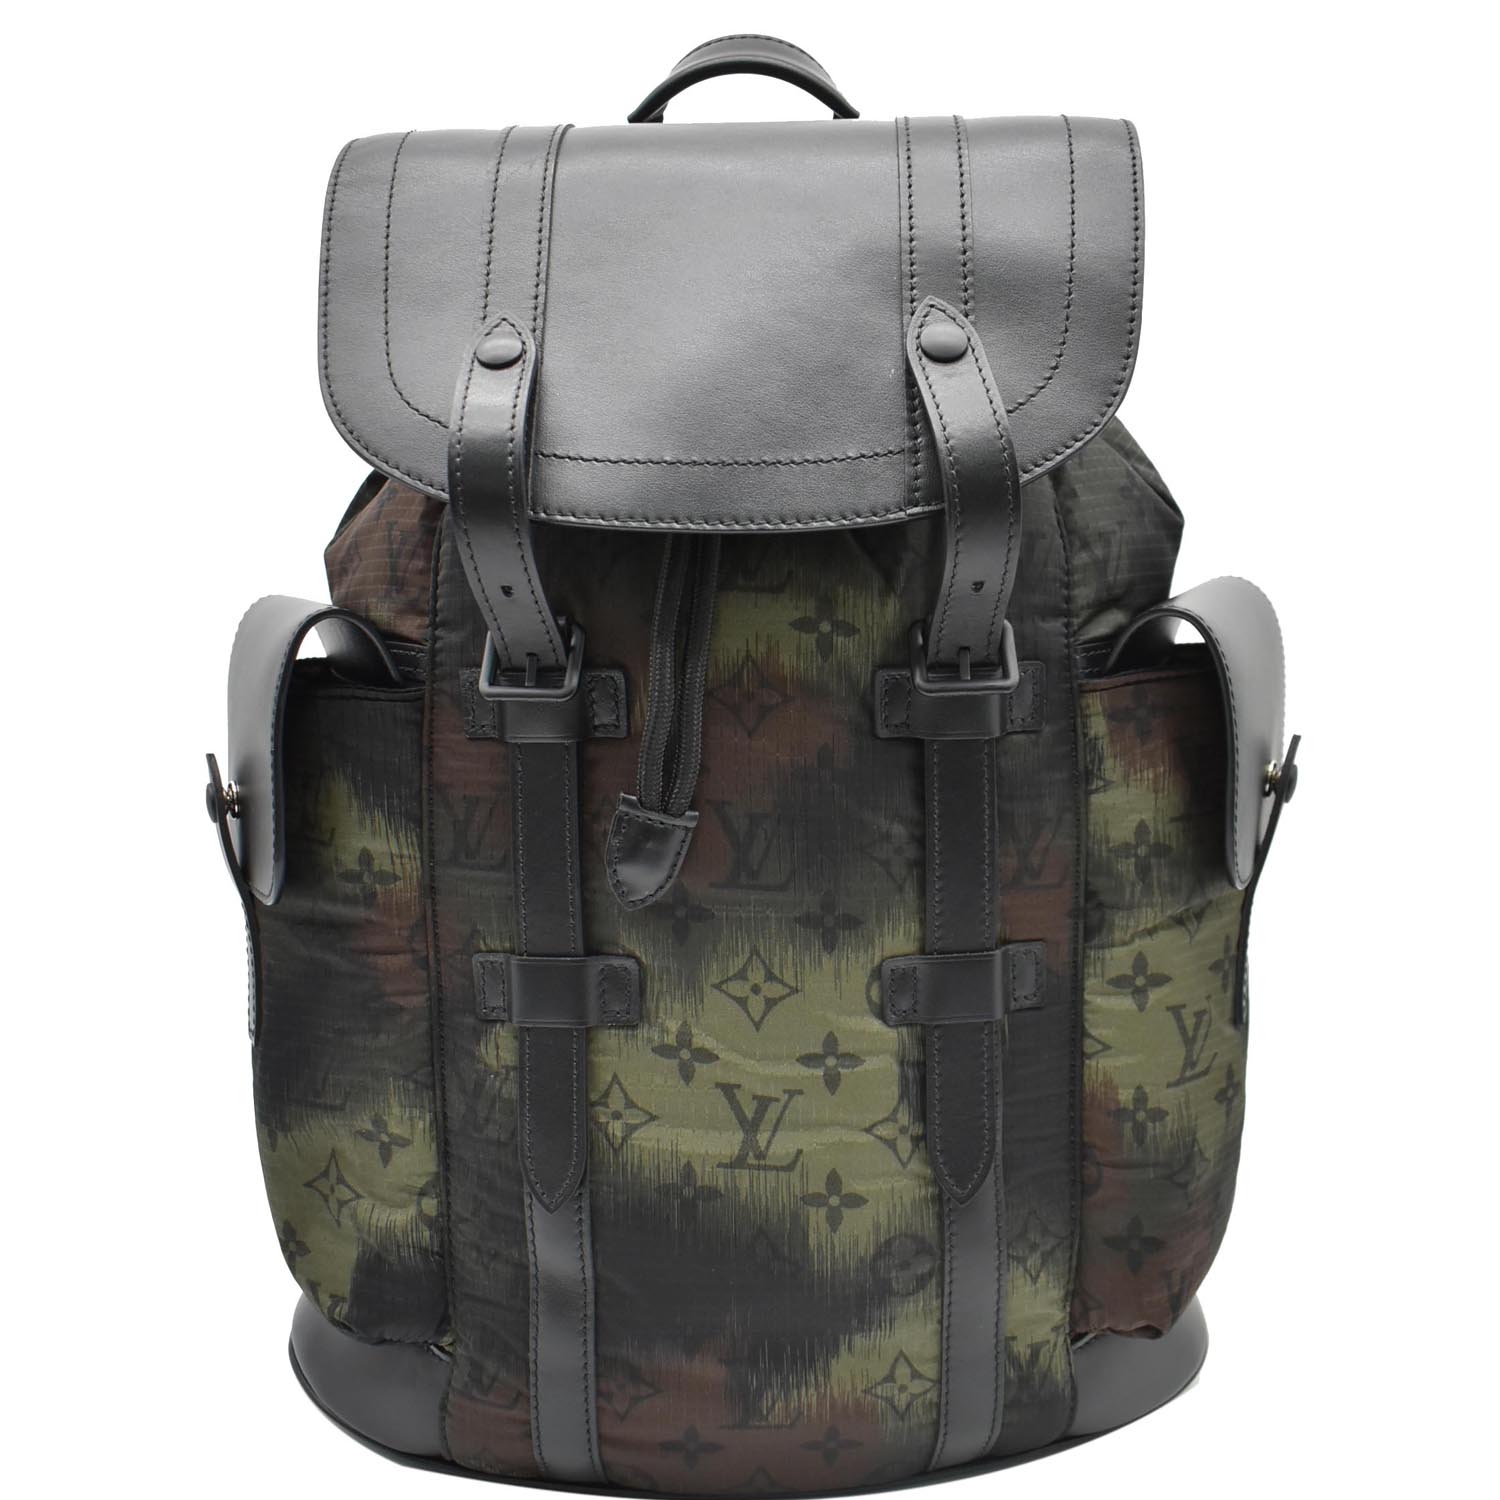 christopher pm backpack louis vuittons